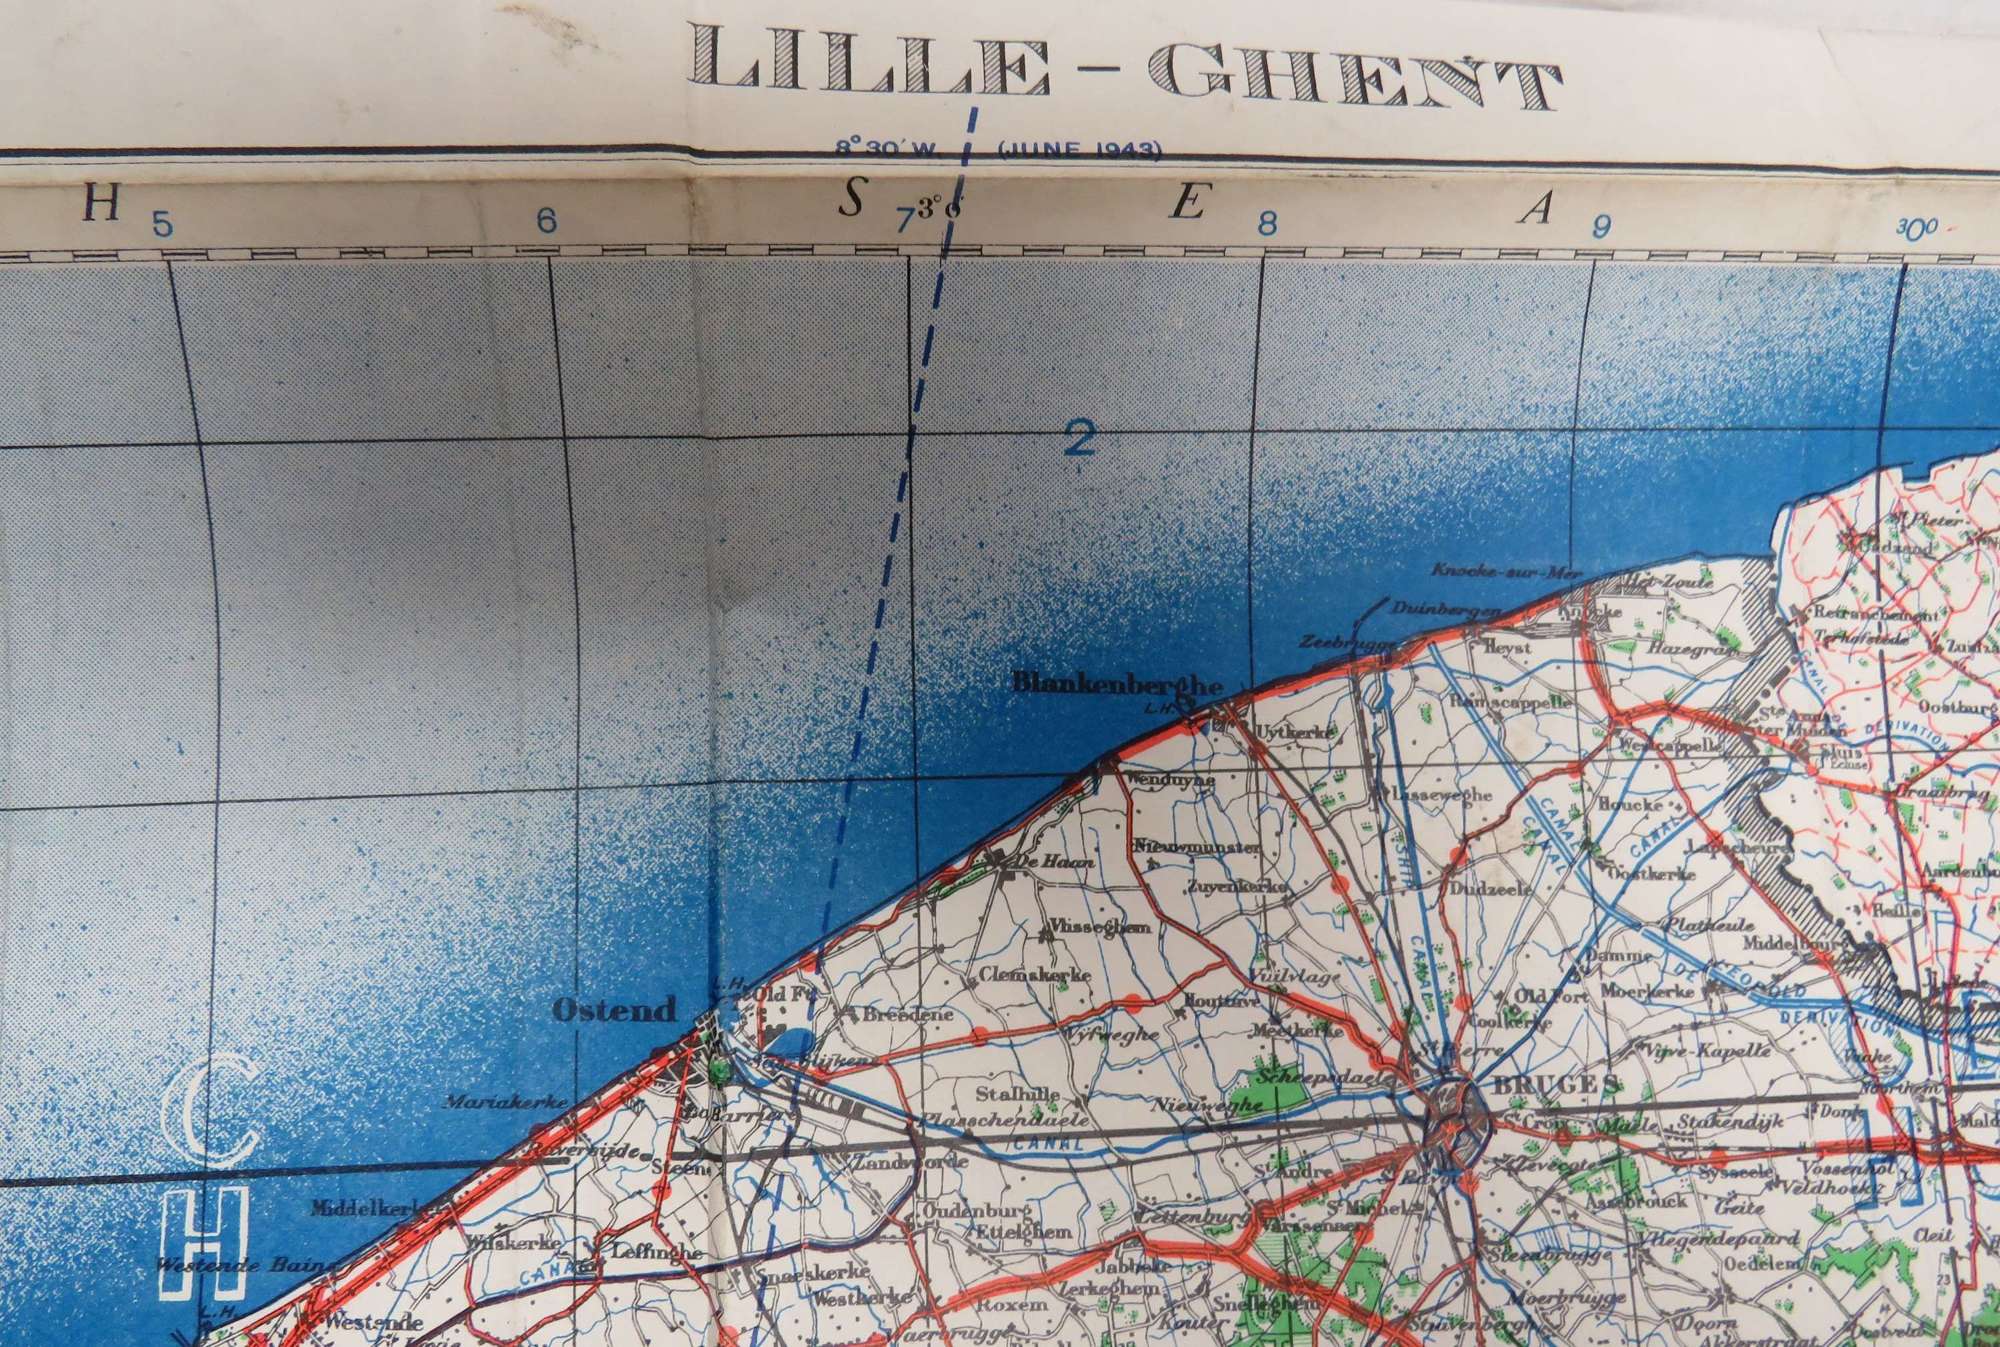 WW2 Army / Air Map Lille - Ghent and the Surrounding Area